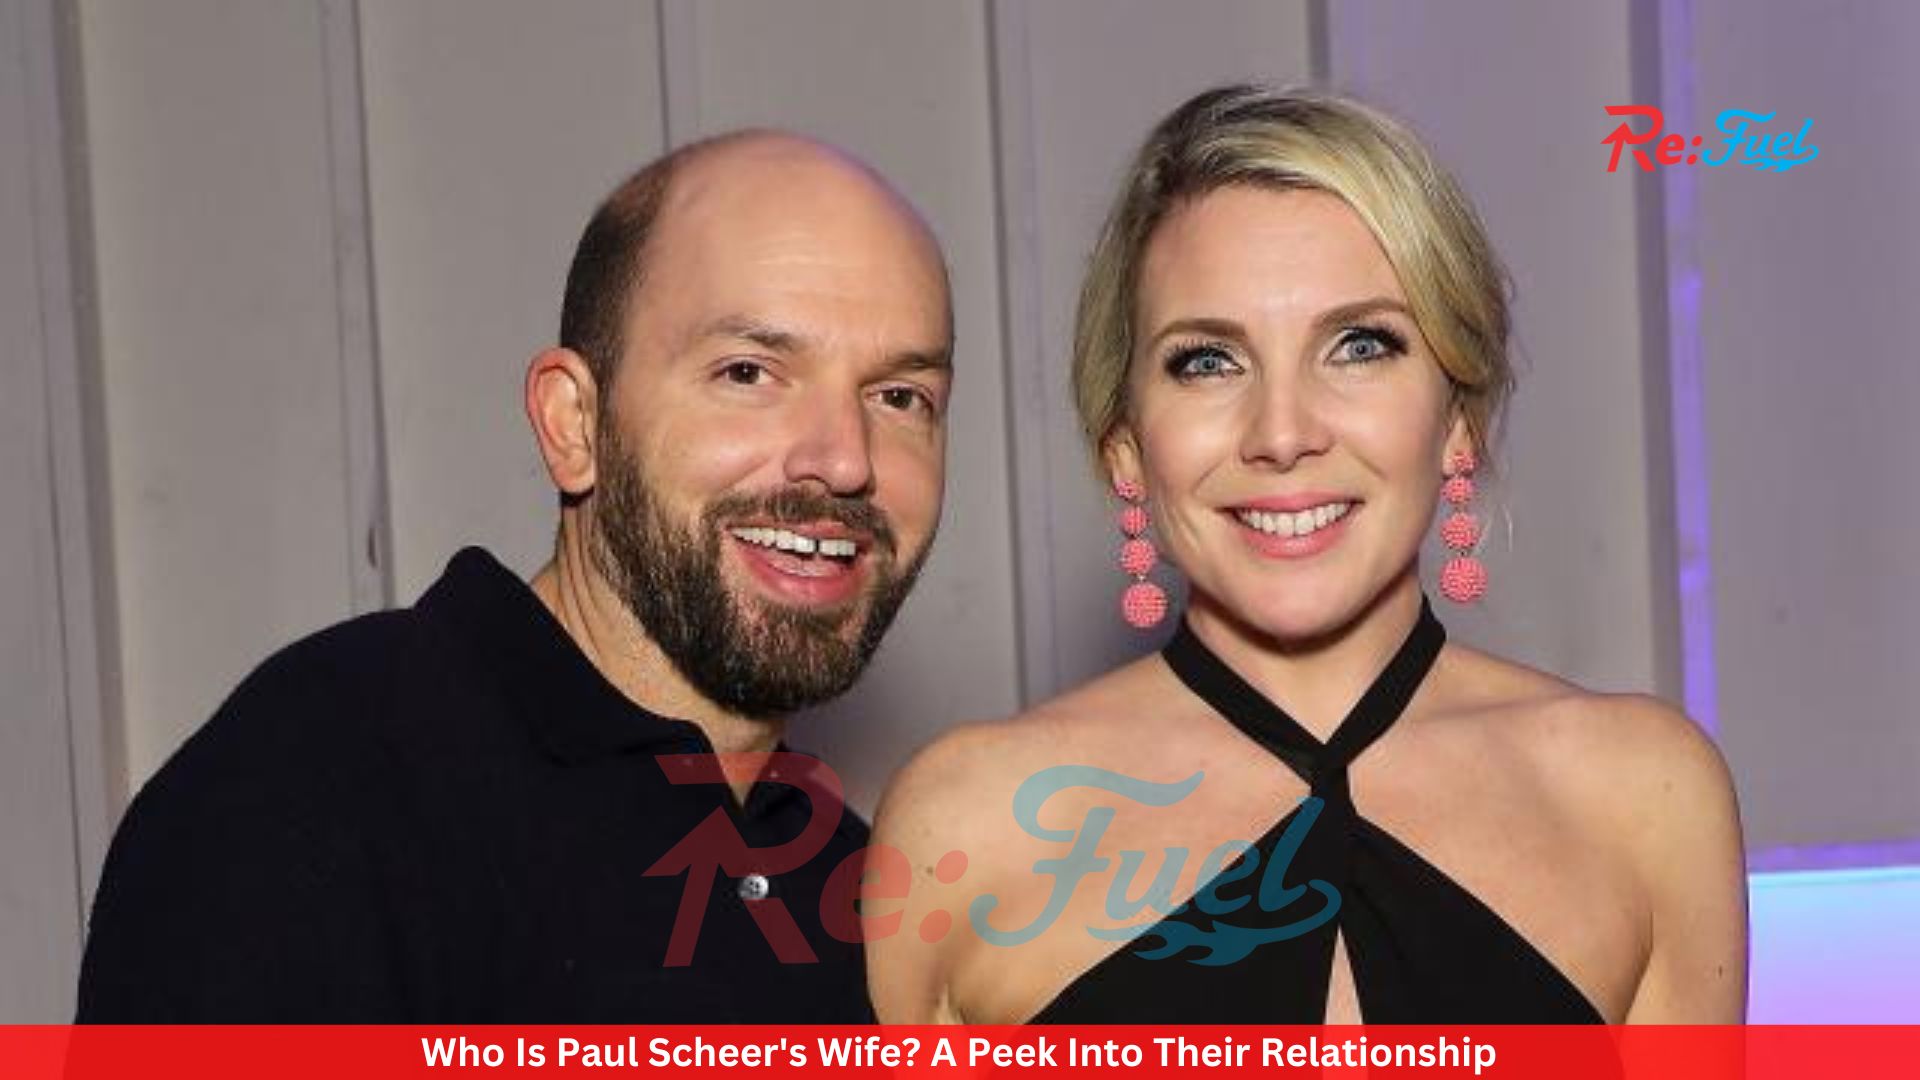 Who Is Paul Scheer's Wife? A Peek Into Their Relationship